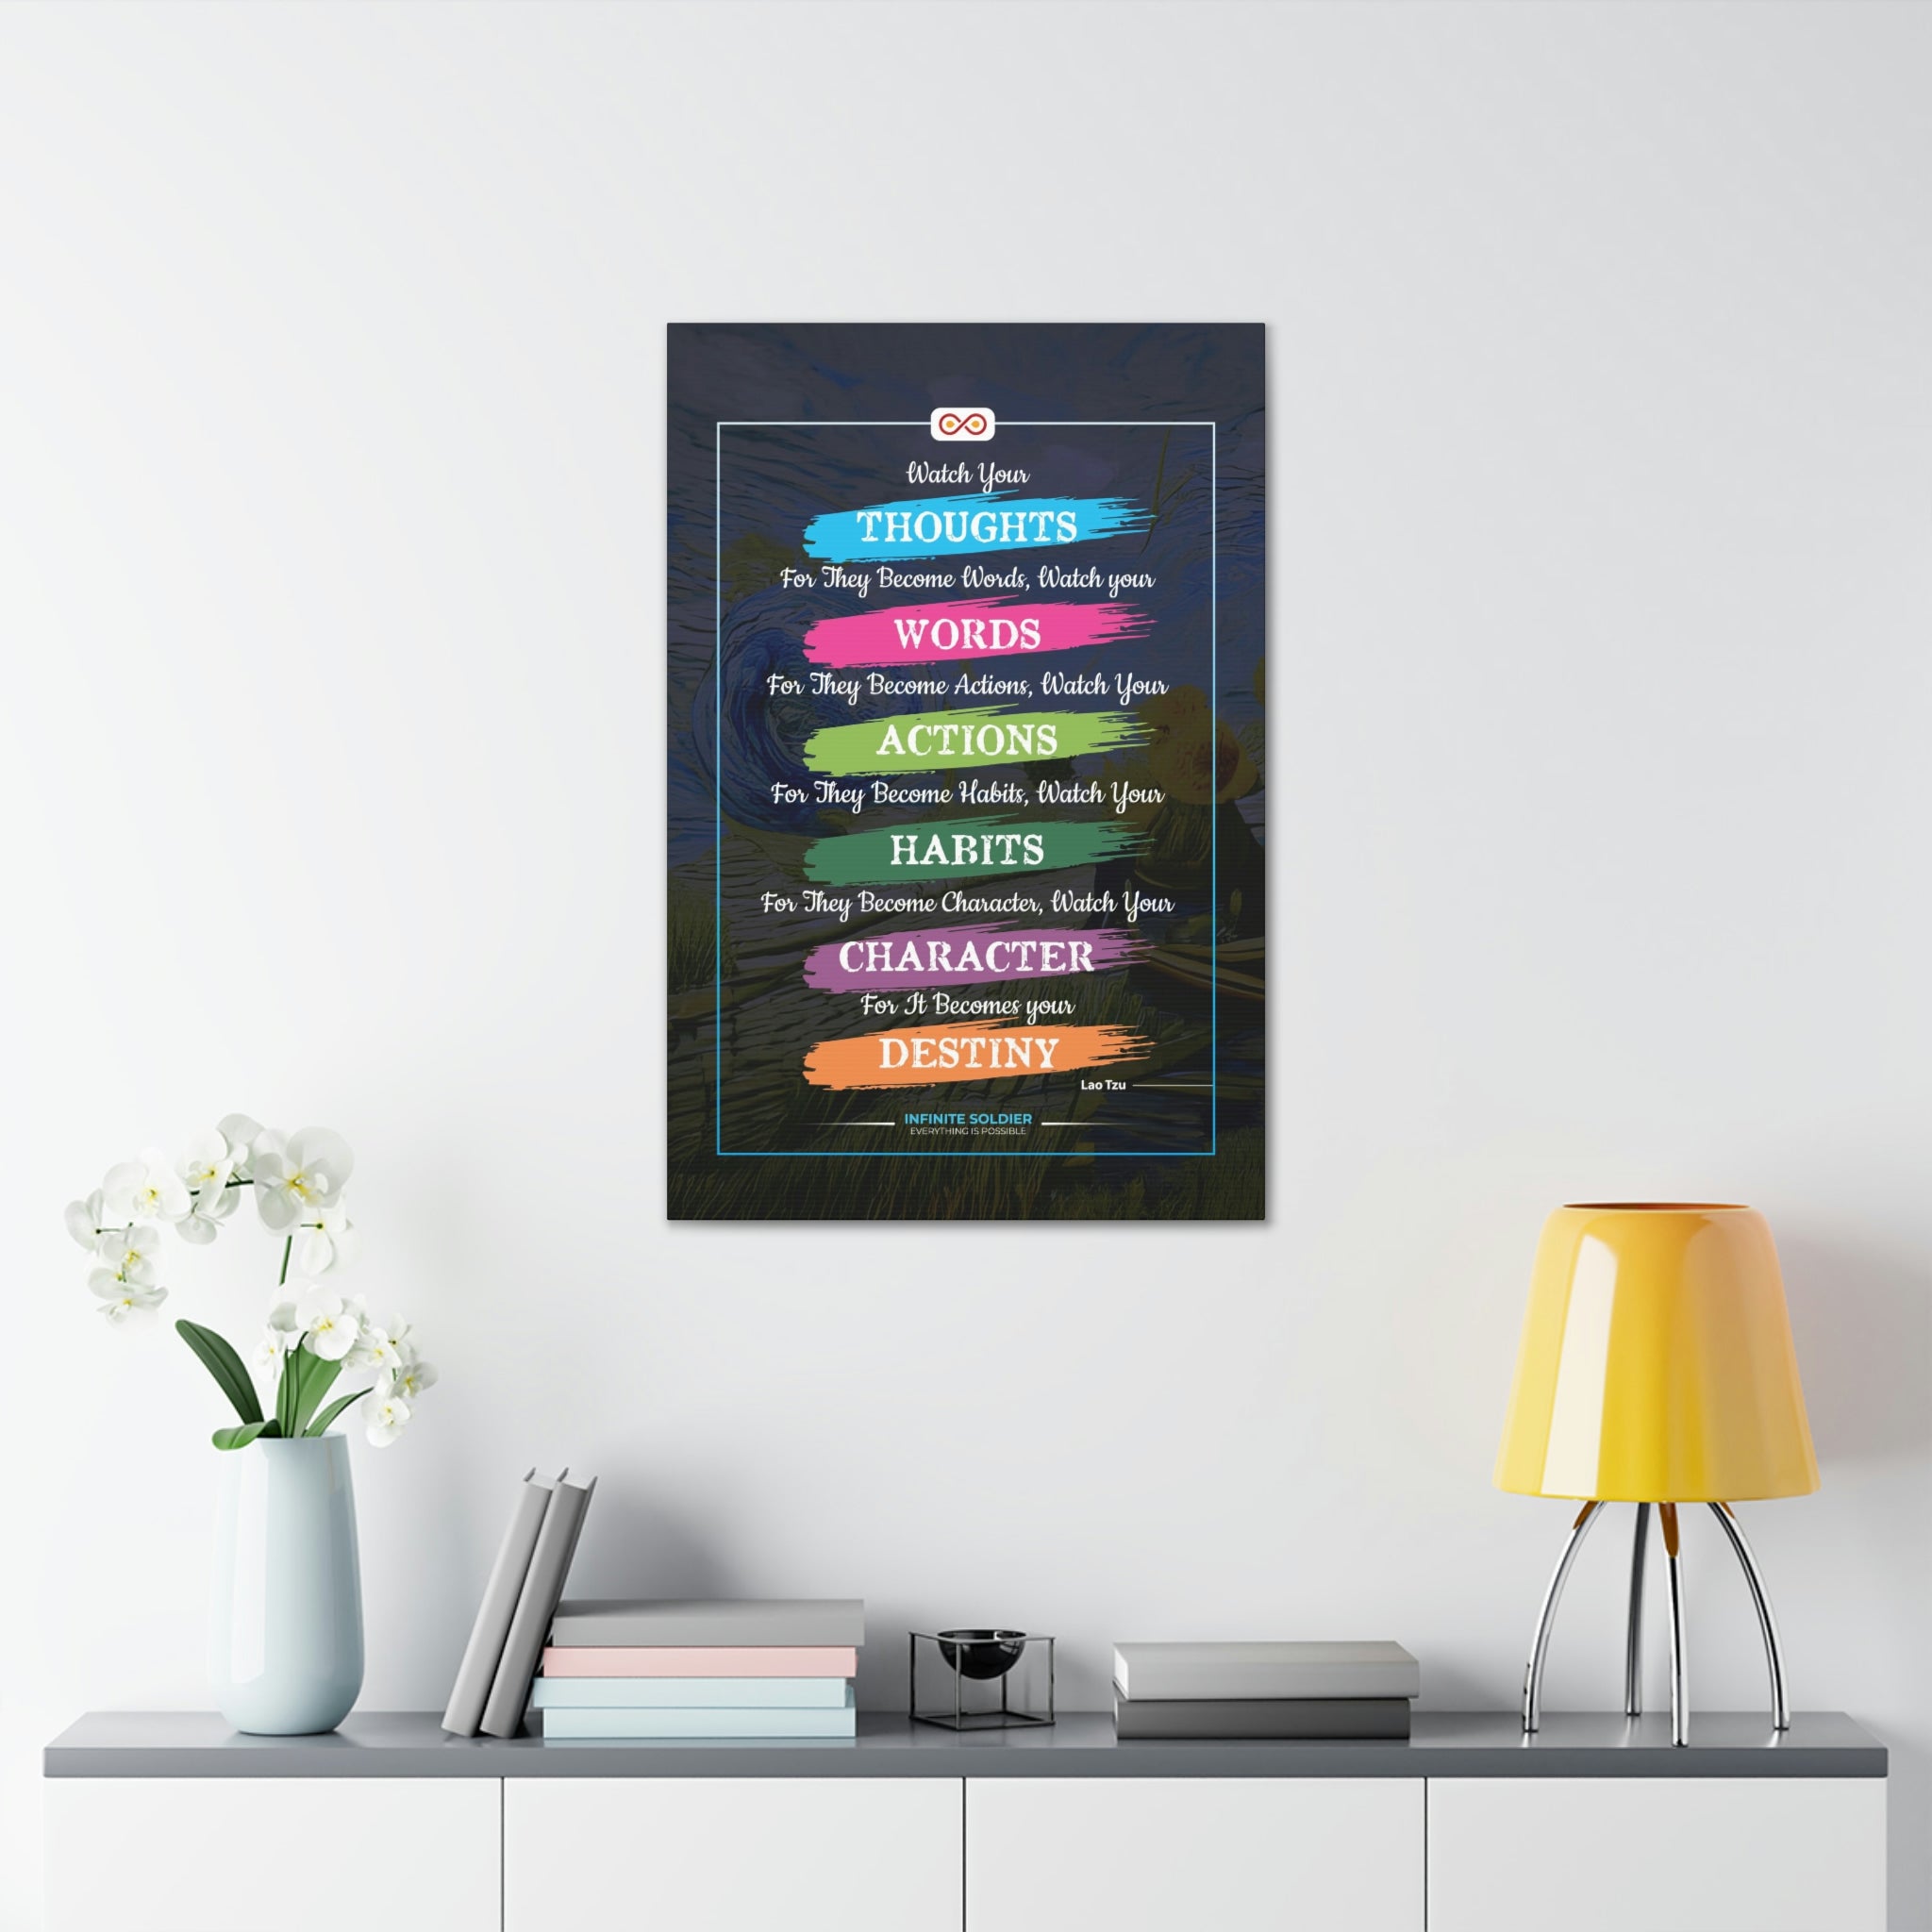 Buddhist Quote Motivational Canvas Poster | Infinite Soldier